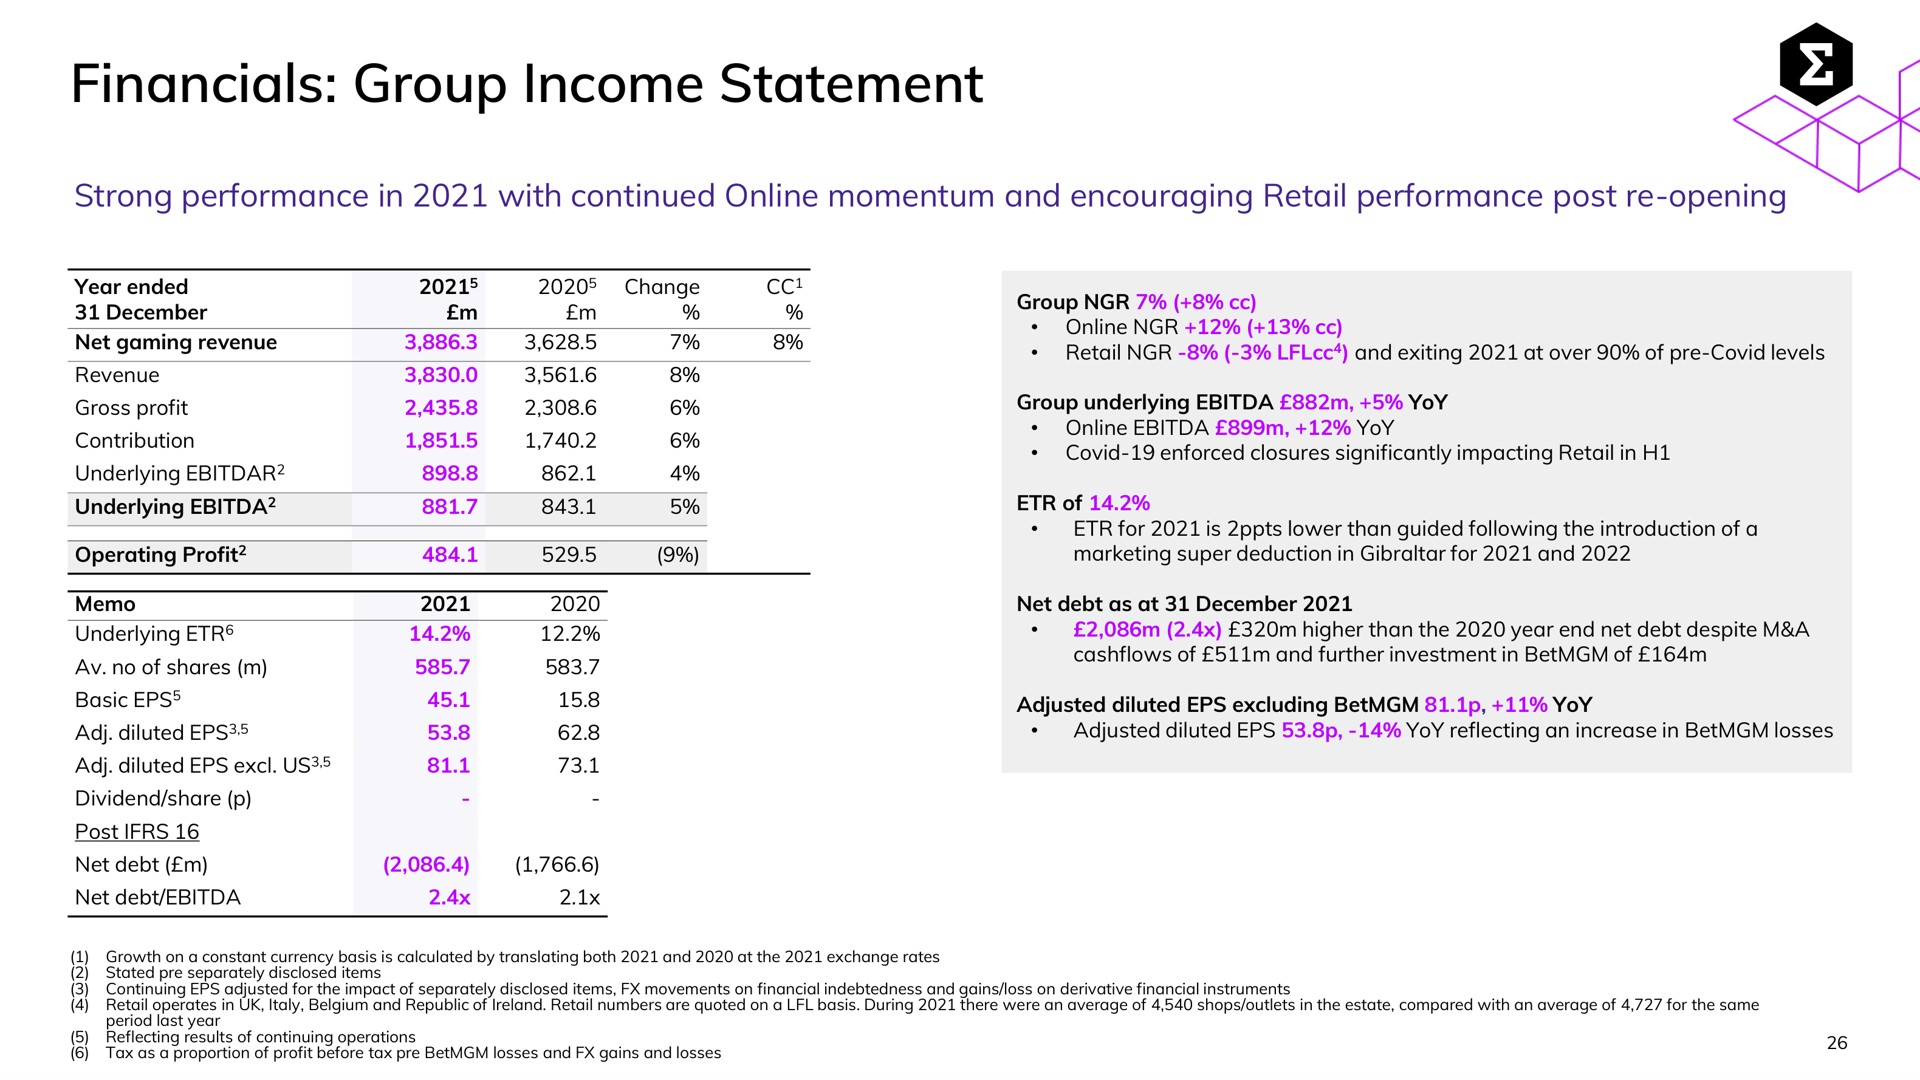 group income statement | Entain Group